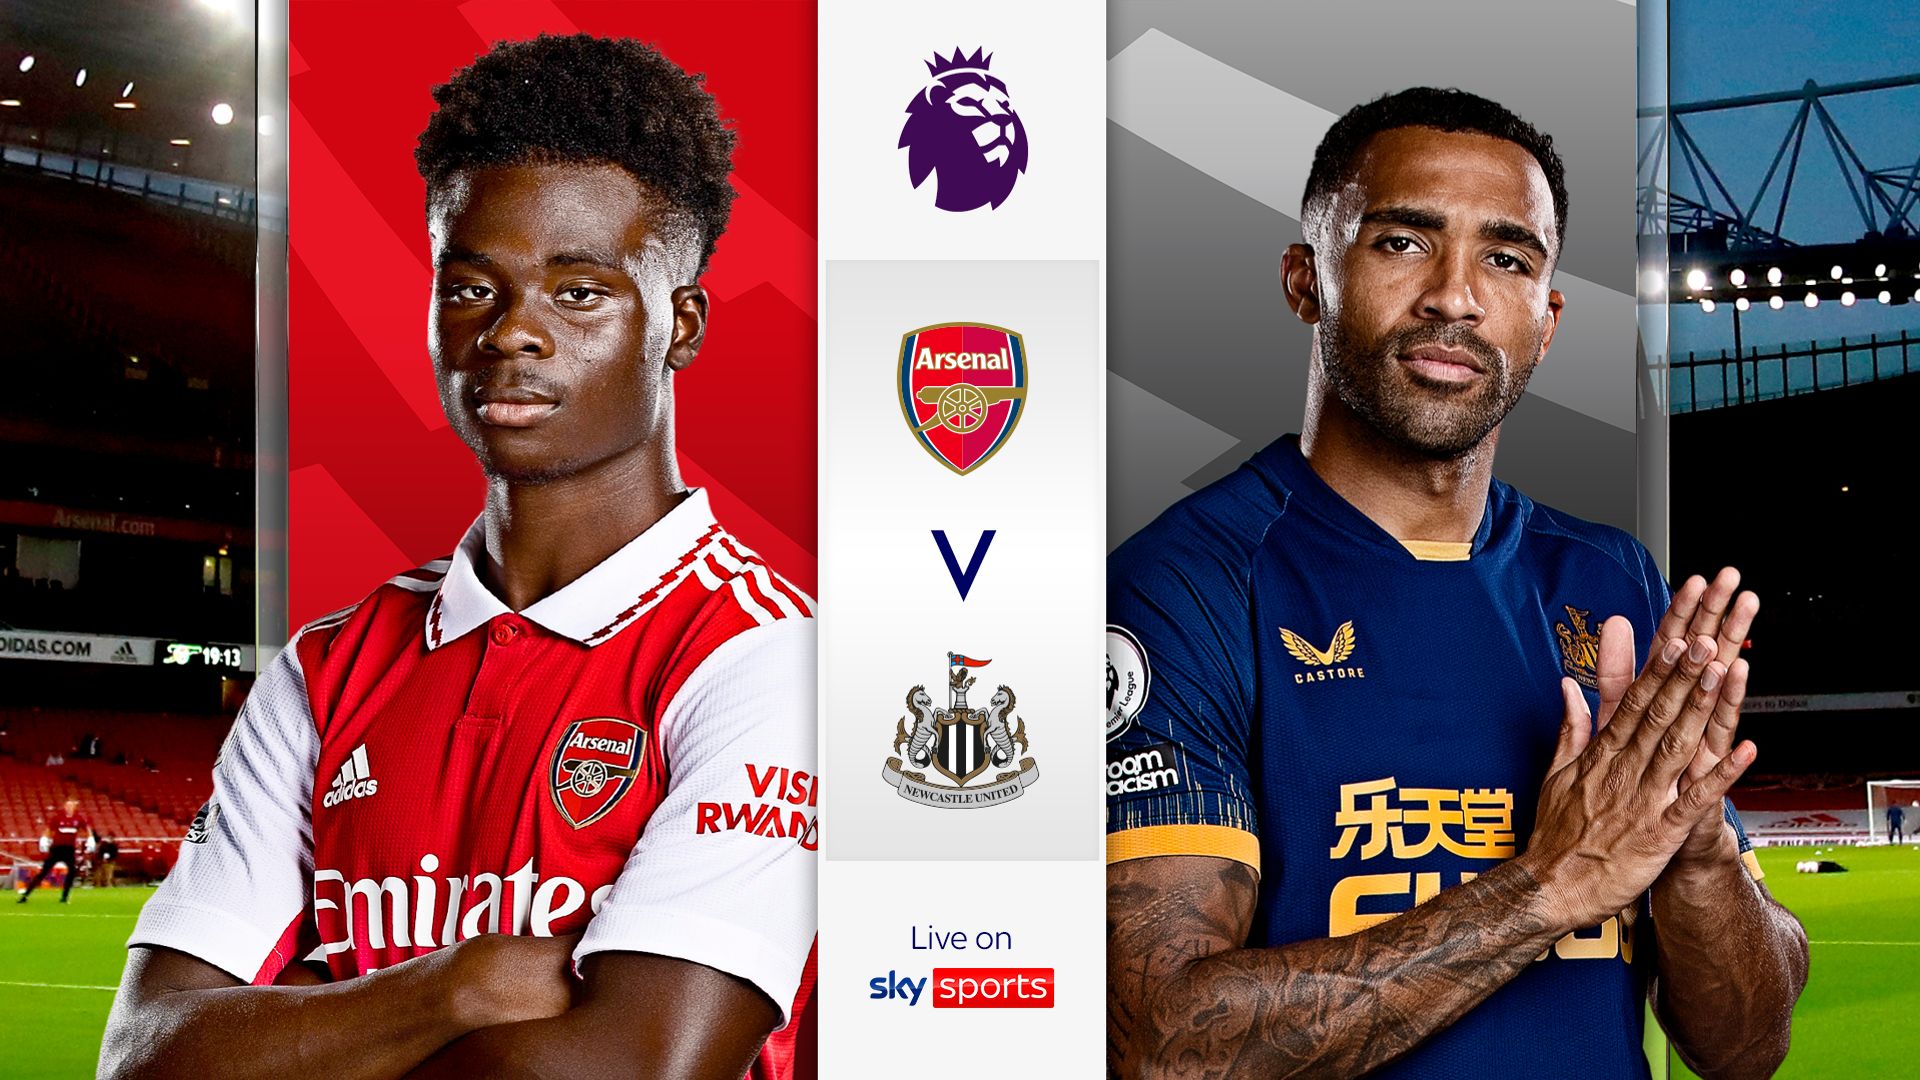 Arsenal vs Newcastle live on Sky - Smith Rowe to be assessed